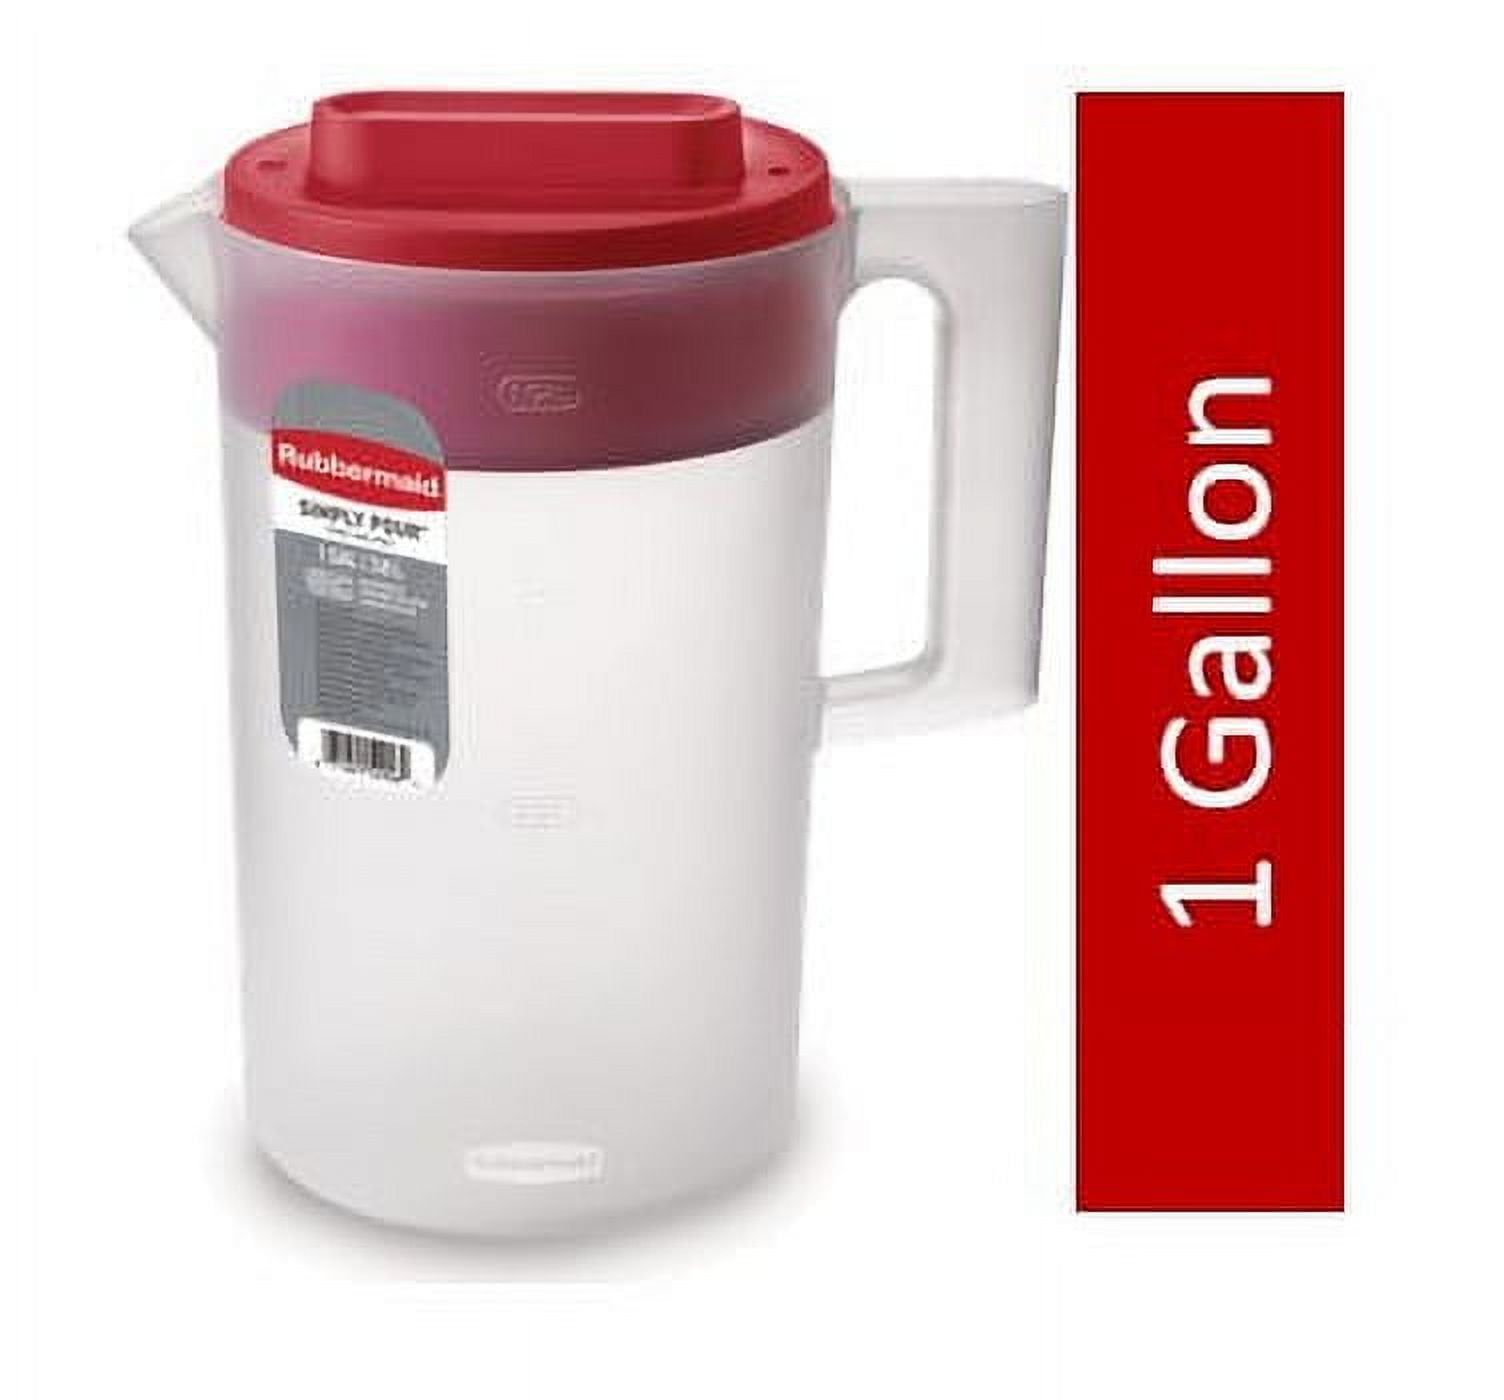 1-Gal Rubbermaid Simply Pour Plastic Pitcher w/ Multifunction Lid $4.95 + Free Store Pickup